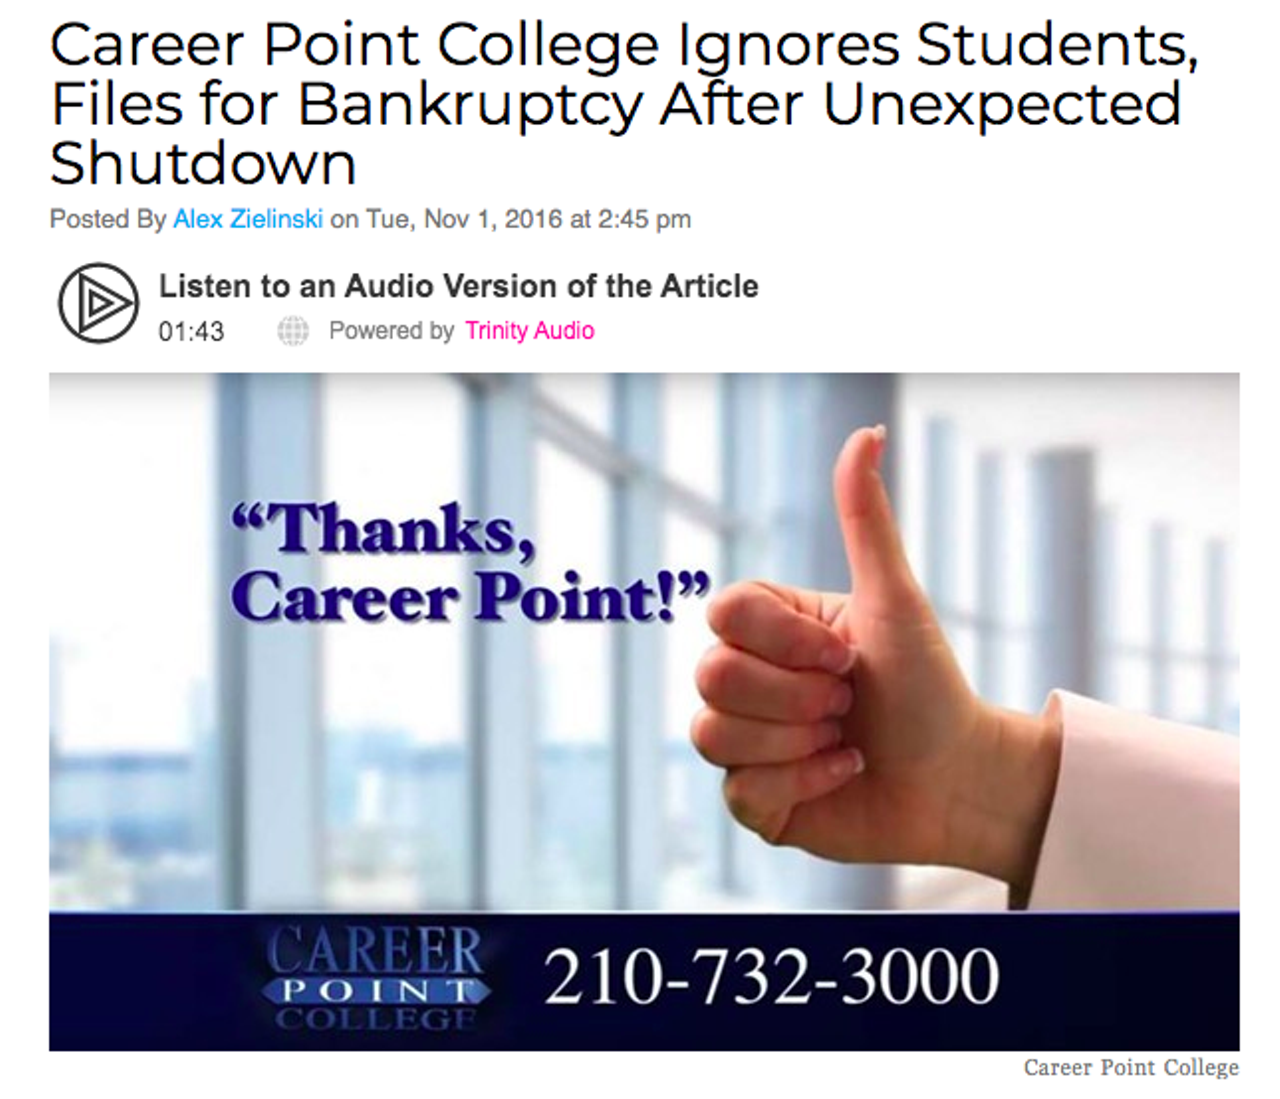 Thanks, Career Point! Read more here.